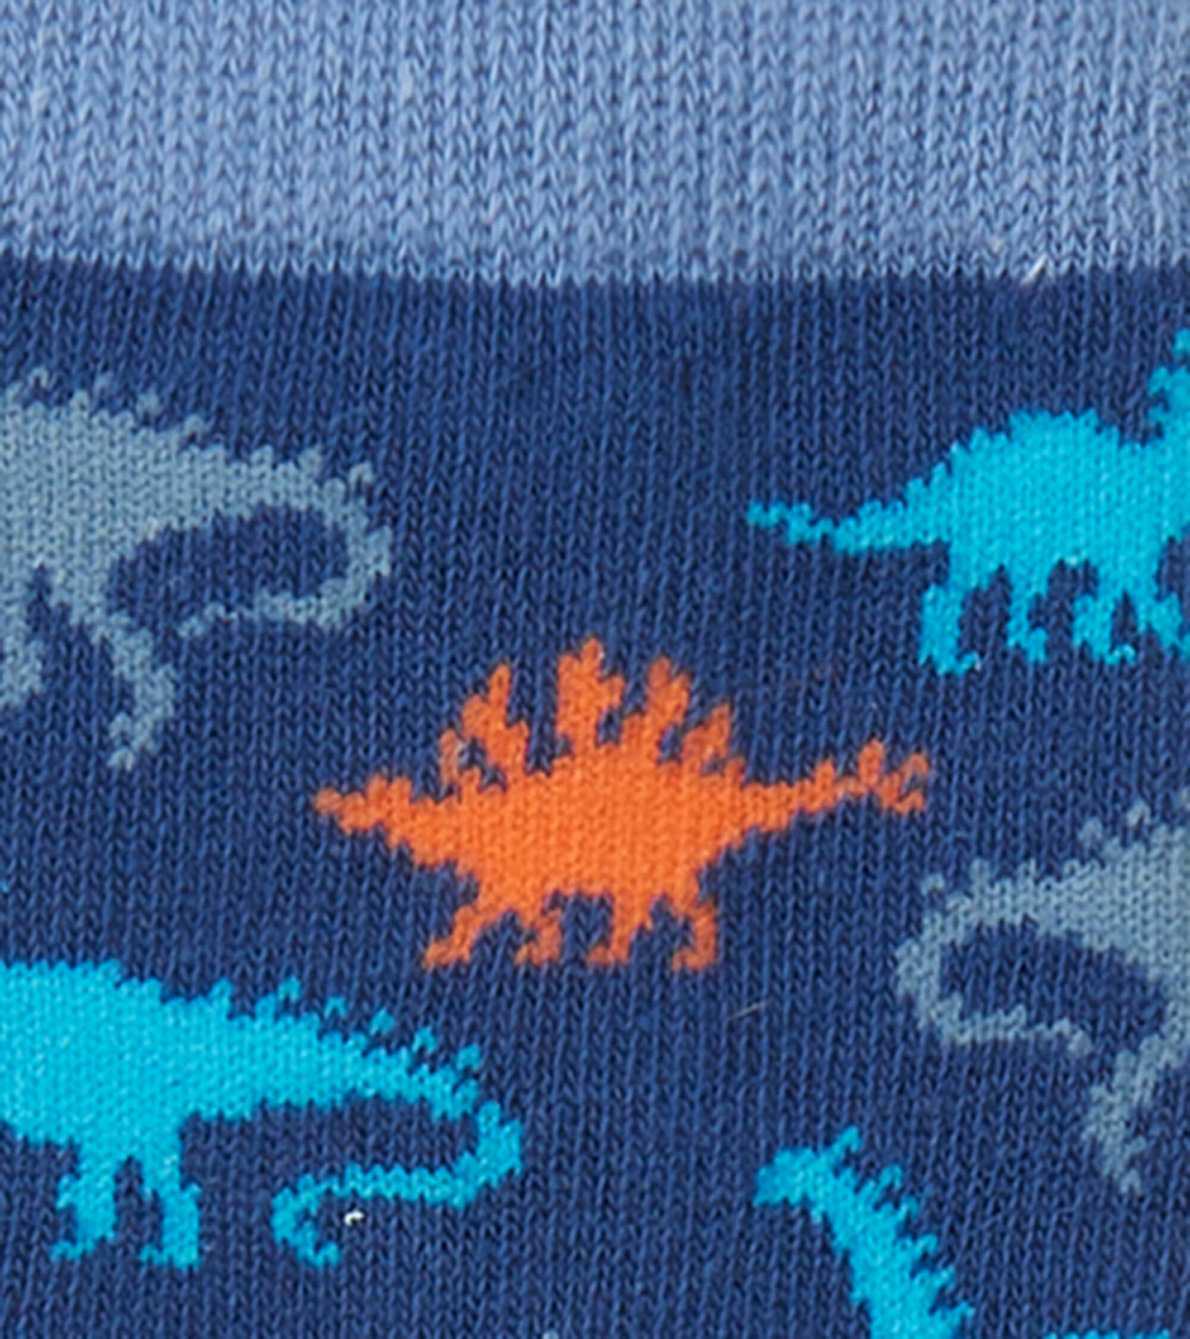 View larger image of Kids Dino Silhouettes Crew Socks